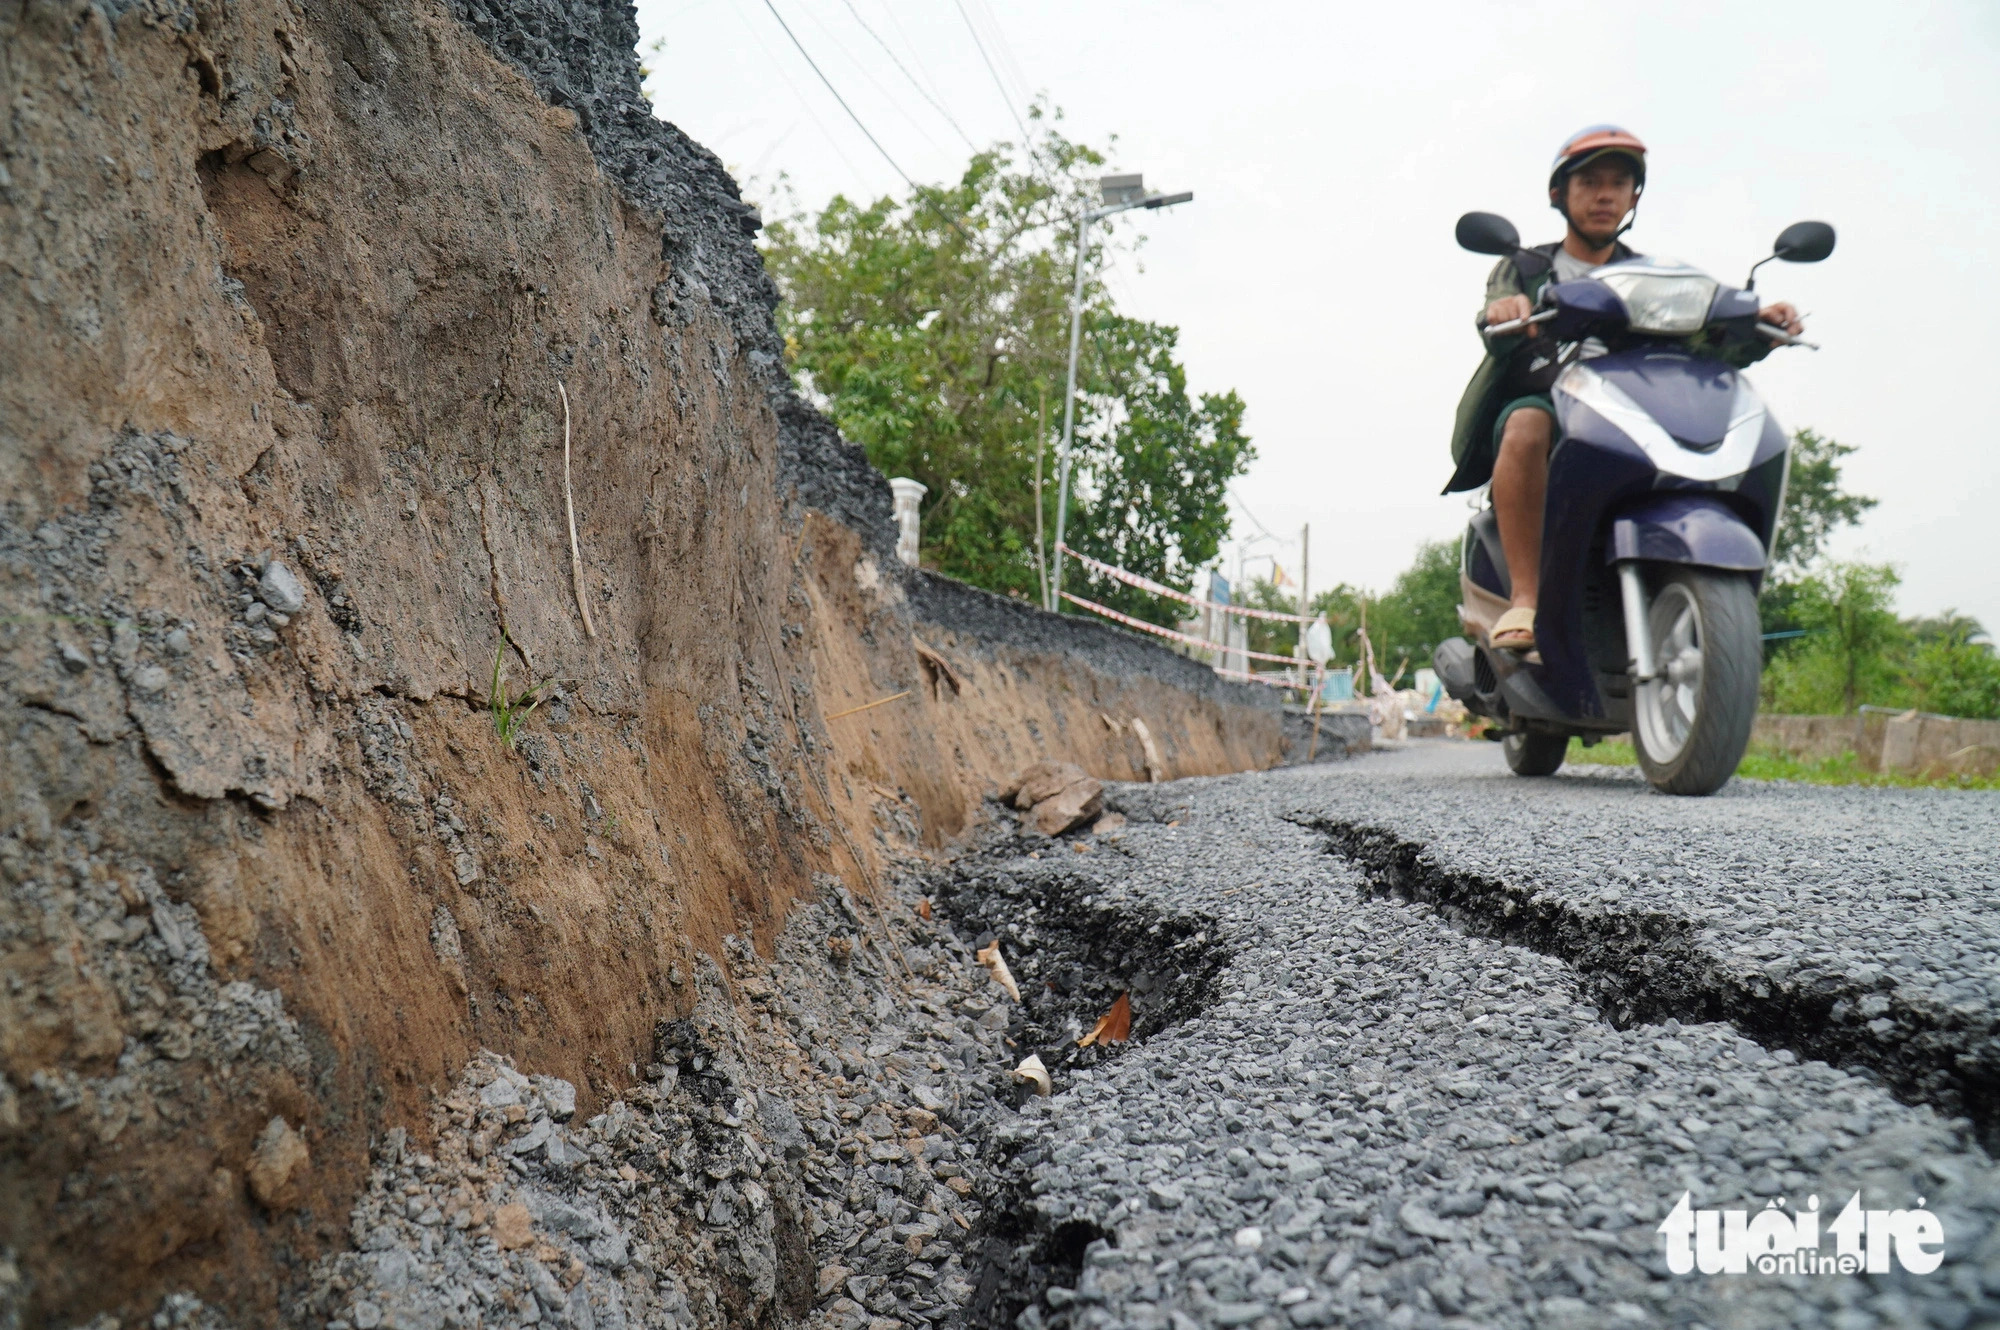 The road surface in some section of the road has subsided by more than one meter. Photo: Mau Truong / Tuoi Tre